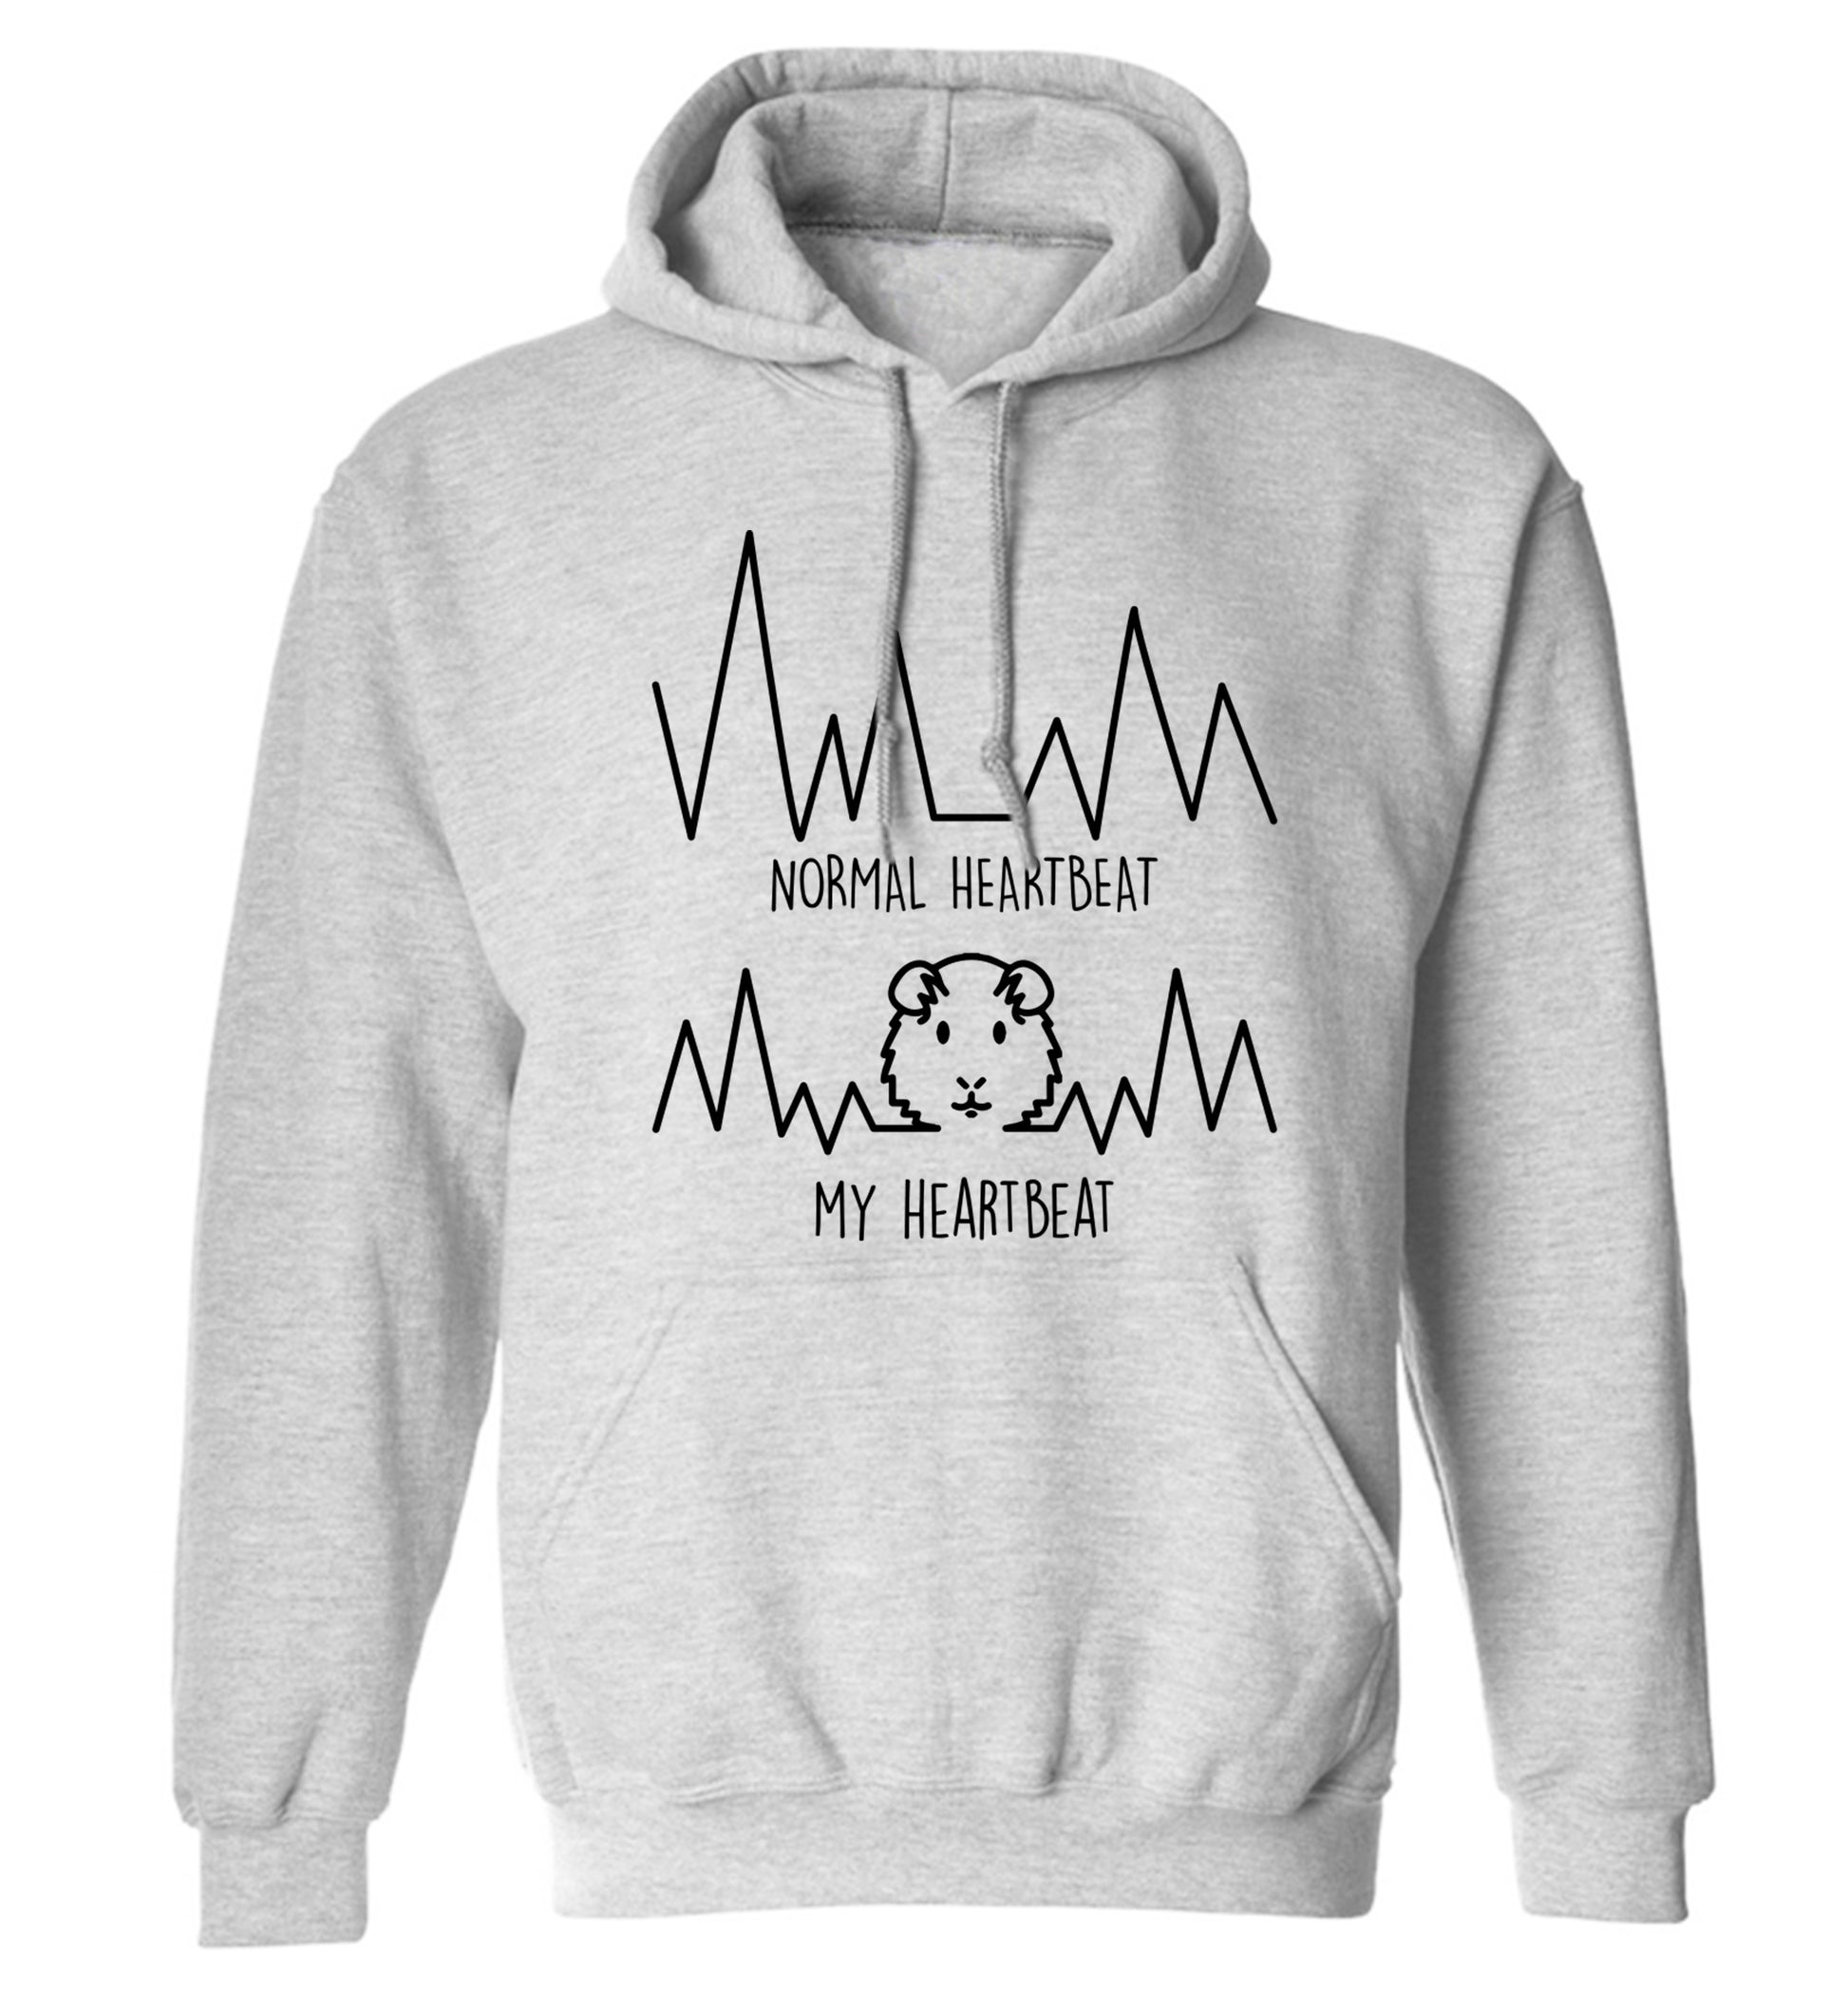 Normal heartbeat vs my heartbeat guinea pig lover adults unisex grey hoodie 2XL